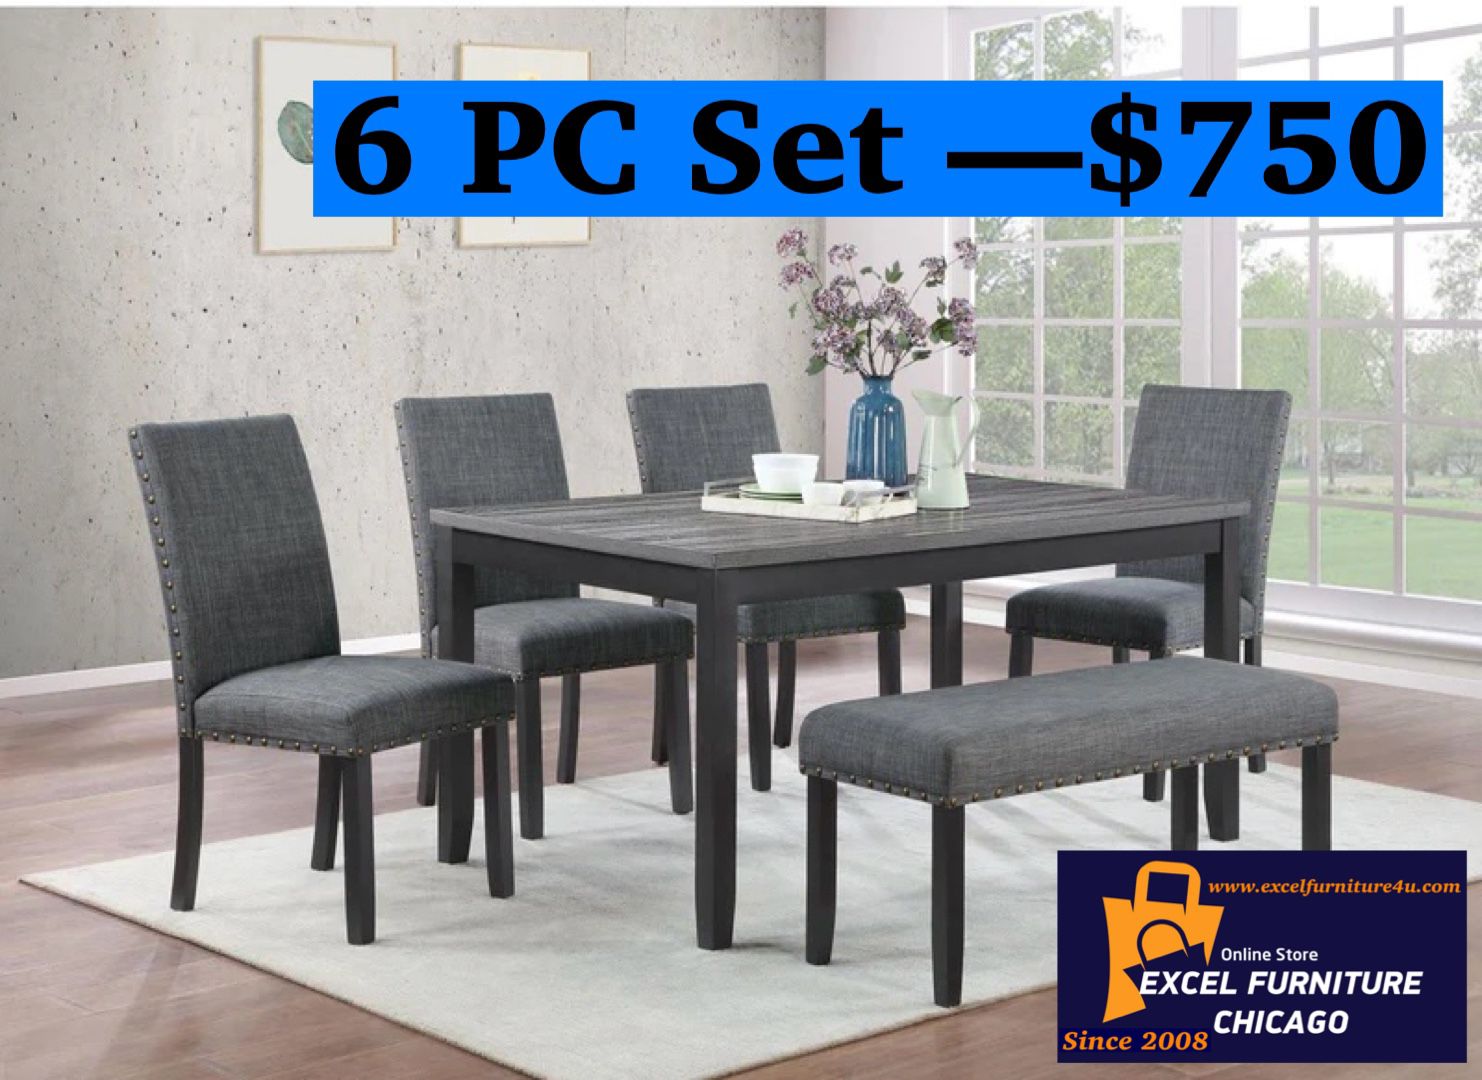 Brand New Dinning Room Set ( Table & Chairs) 